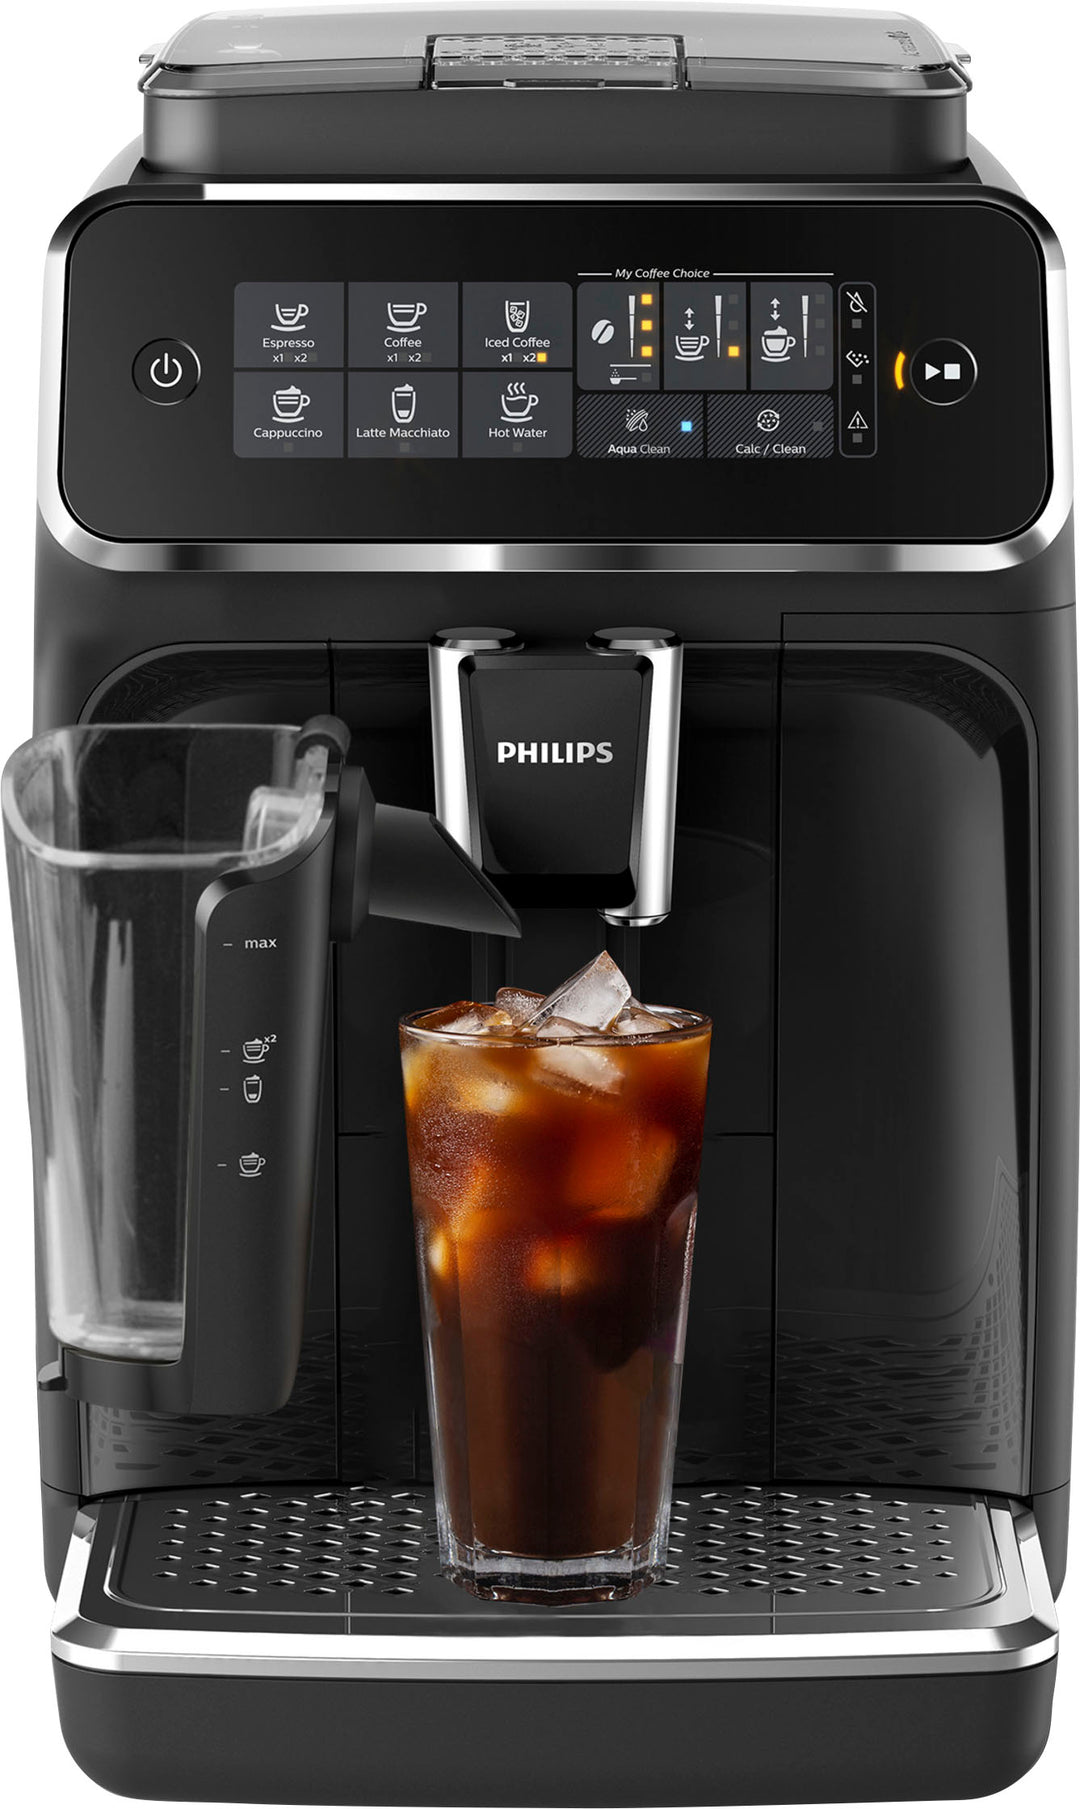 Philips 3200 Series Fully Automatic Espresso Machine with LatteGo Milk Frother and Iced Coffee, 5 Coffee Varieties - Black_1